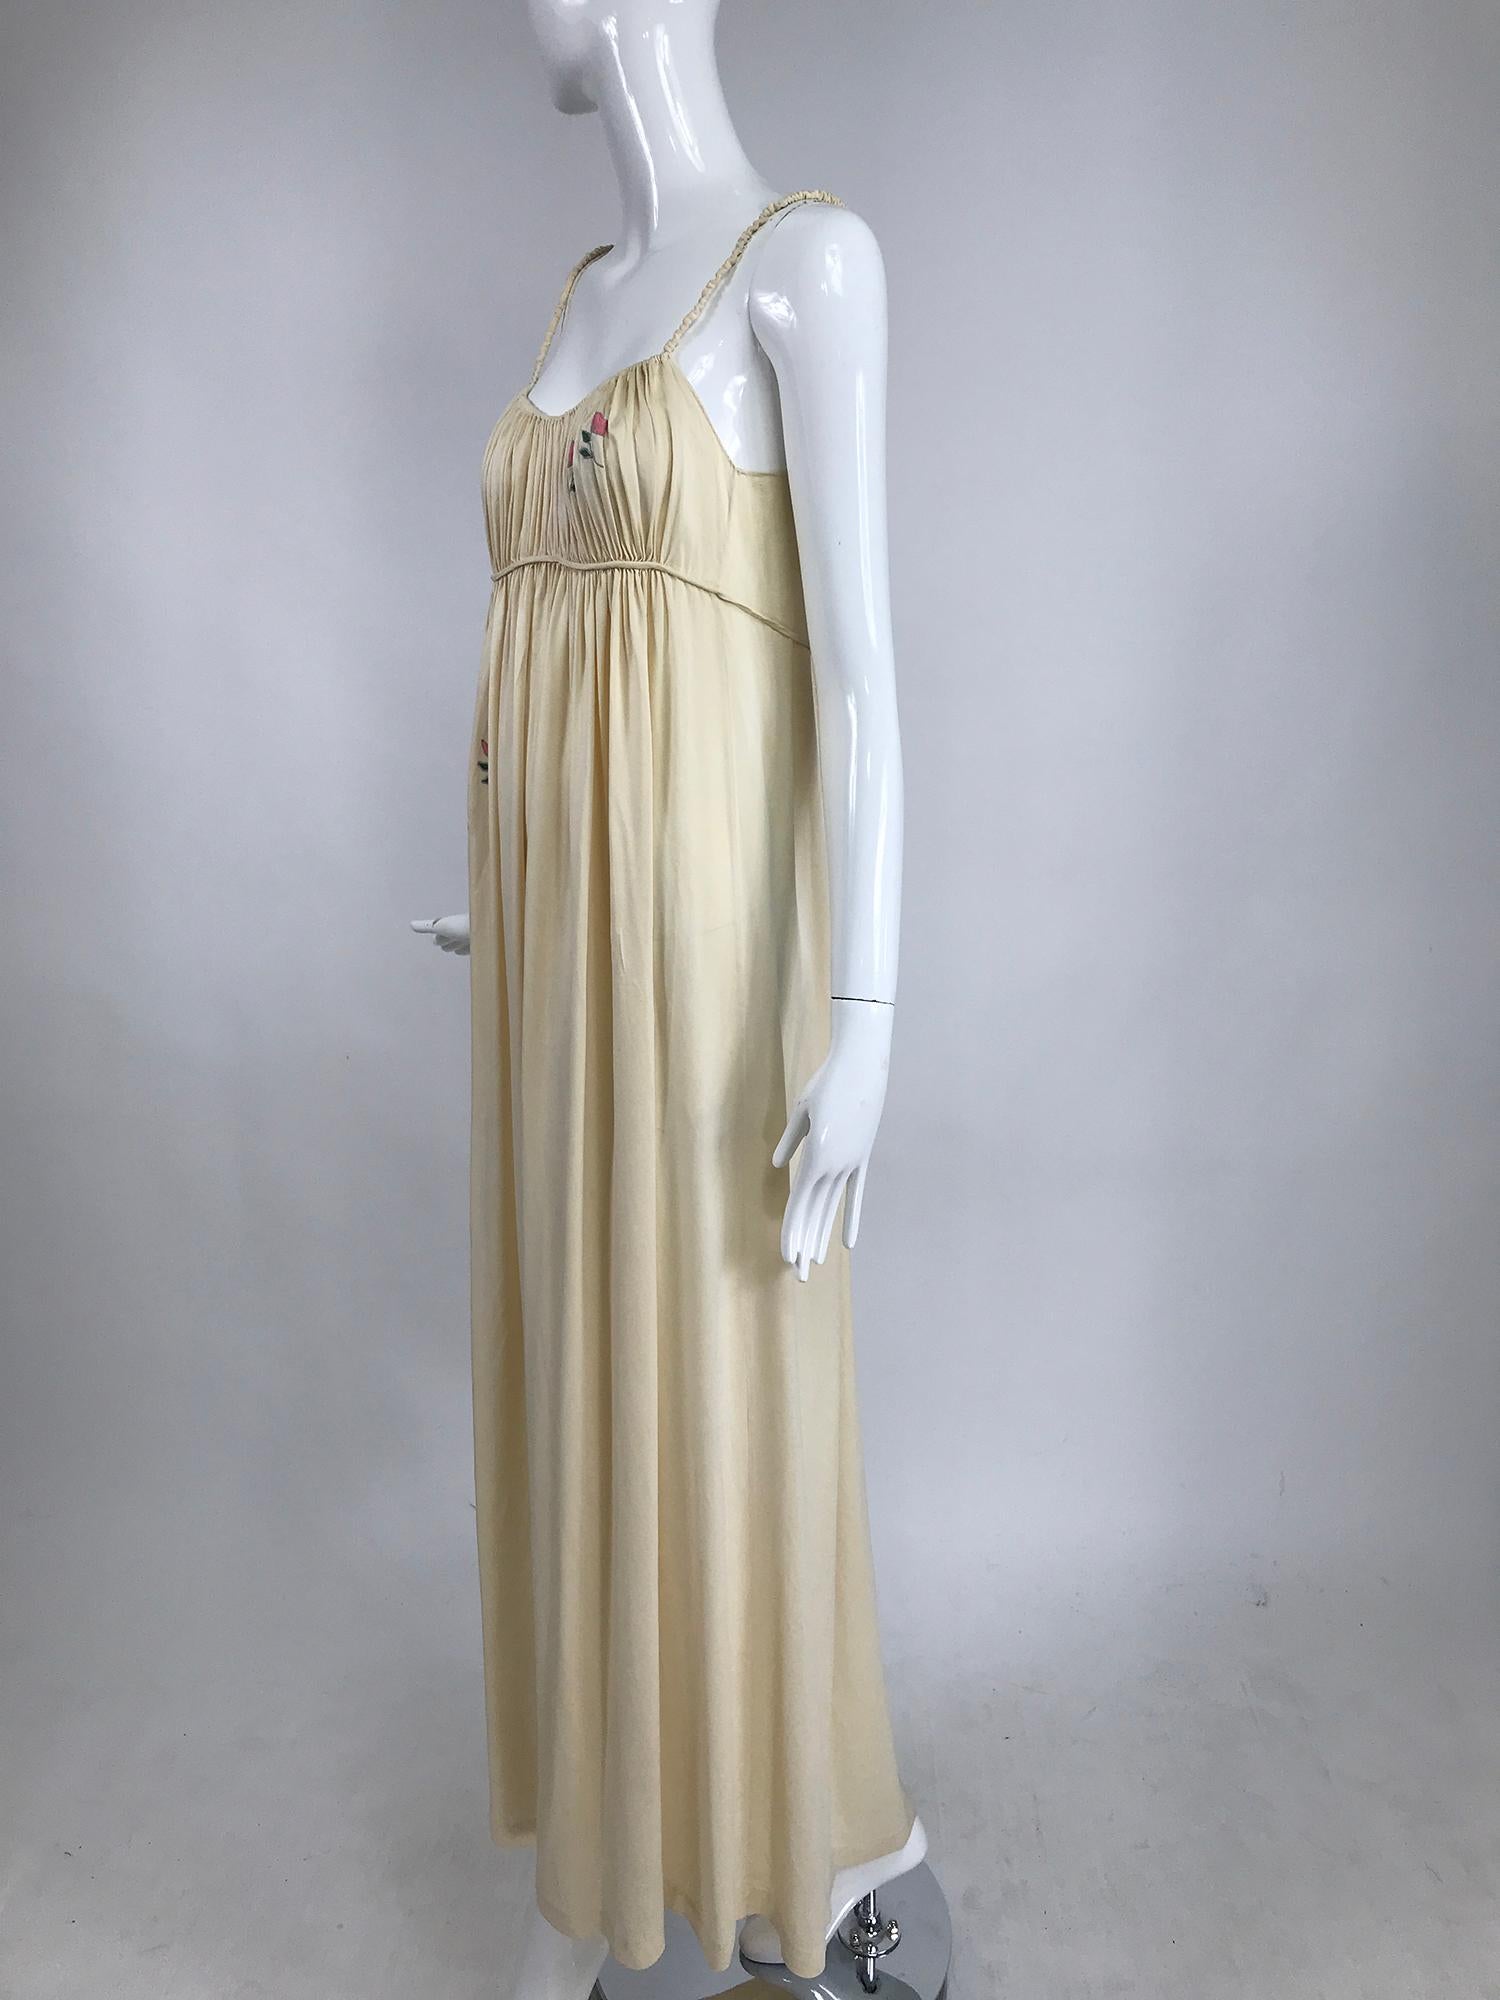 1930s ivory crepe de Chine Applique night gown or dress. Beautiful silk gown has shirred cased elastic straps, a gathered empire bust and long semi full skirt. The bust is gathered and has applique flowers at the front side, the upper skirt also has